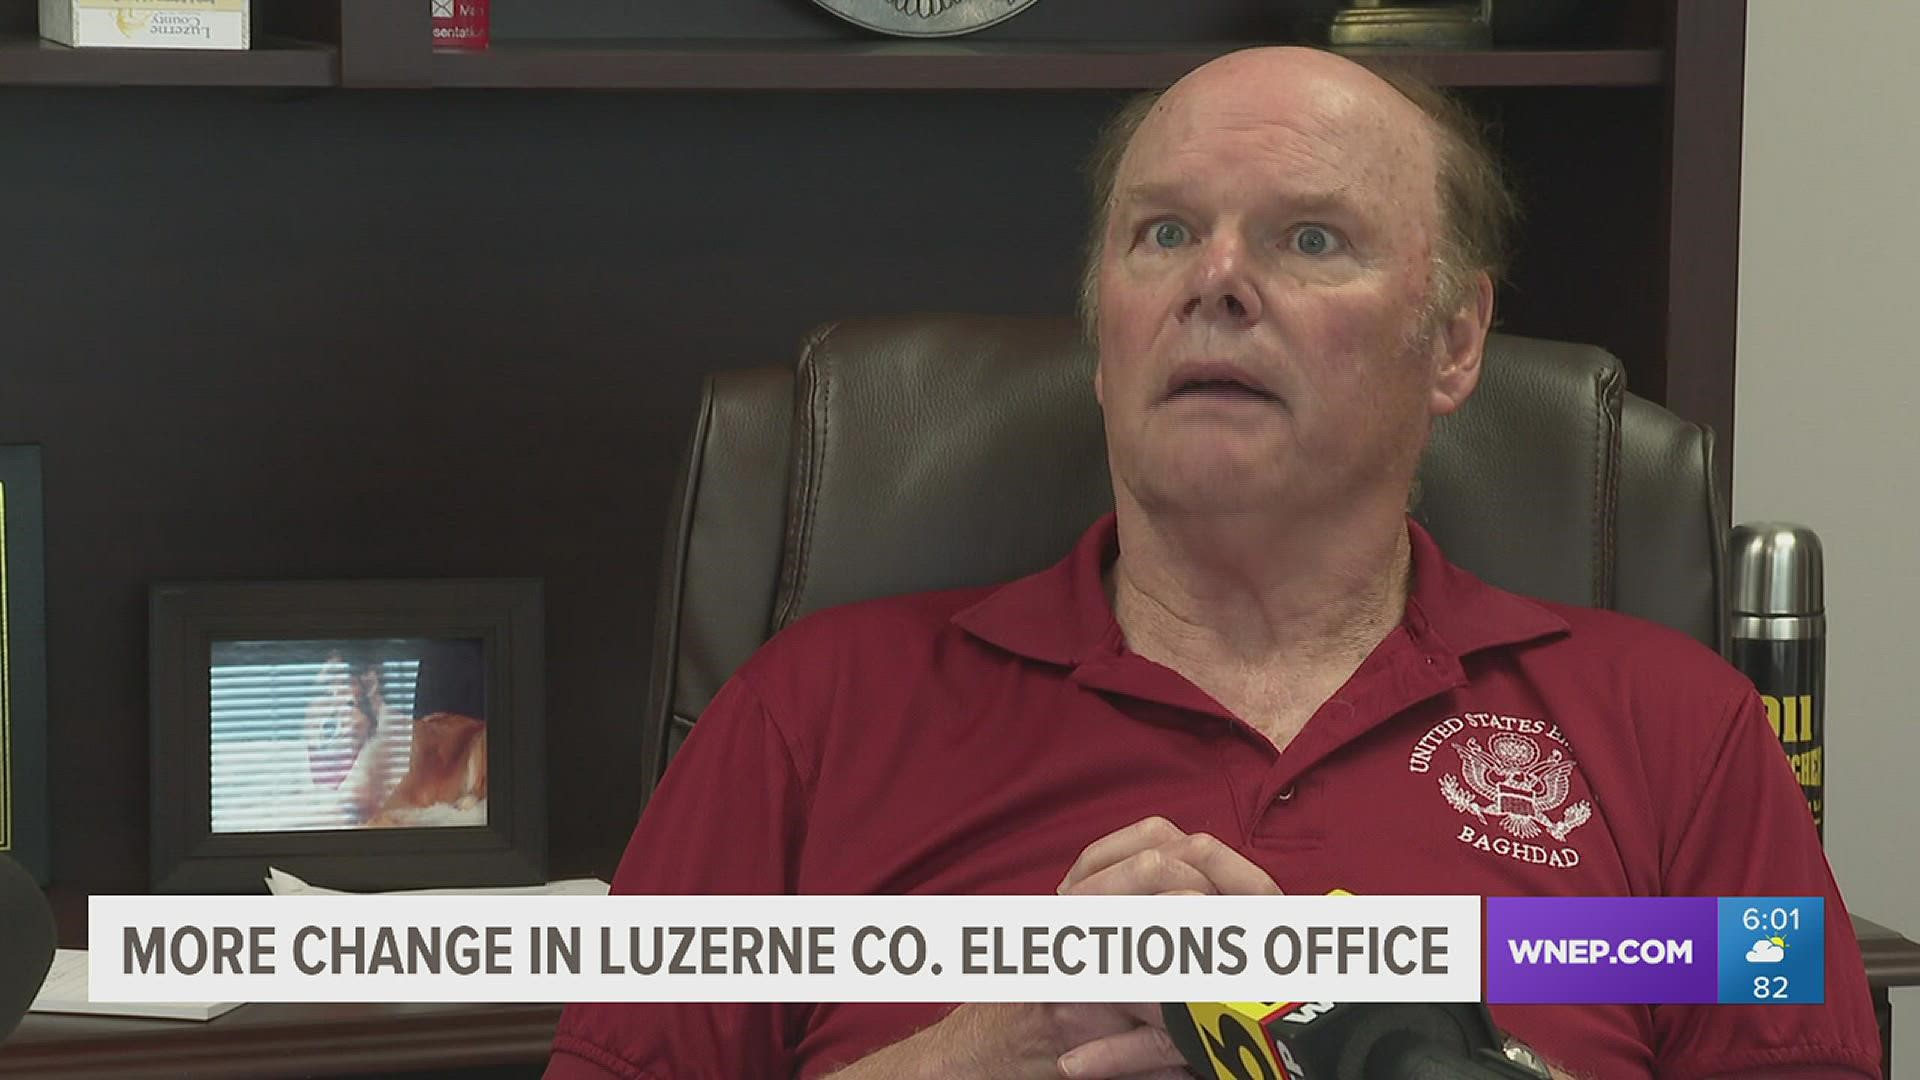 There's another shakeup in the Luzerne County elections office. The director of elections resigned last week, the second to leave that post in the last year.